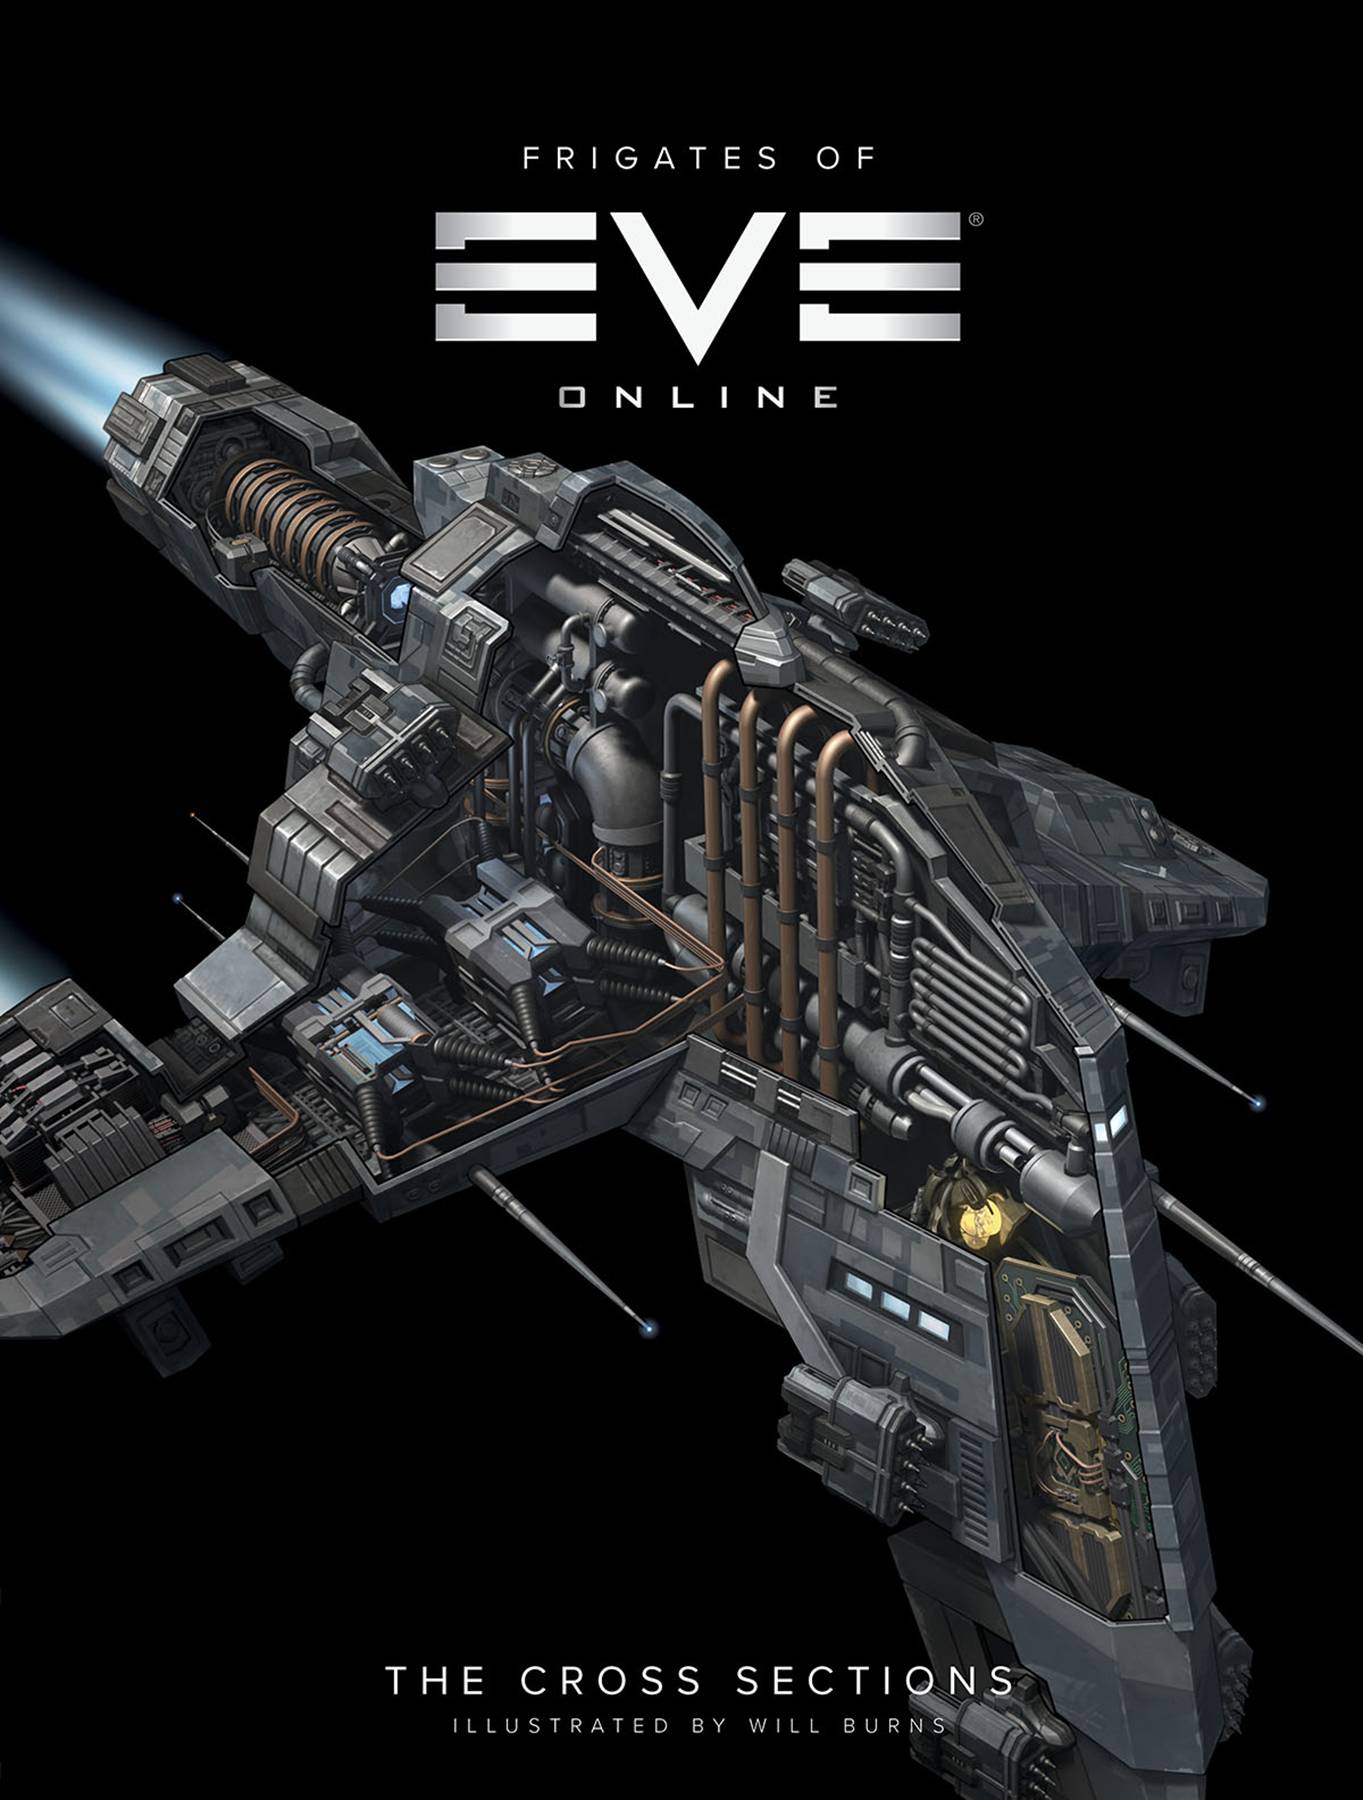 Frigates of Eve Online Cross Sections Hardcover